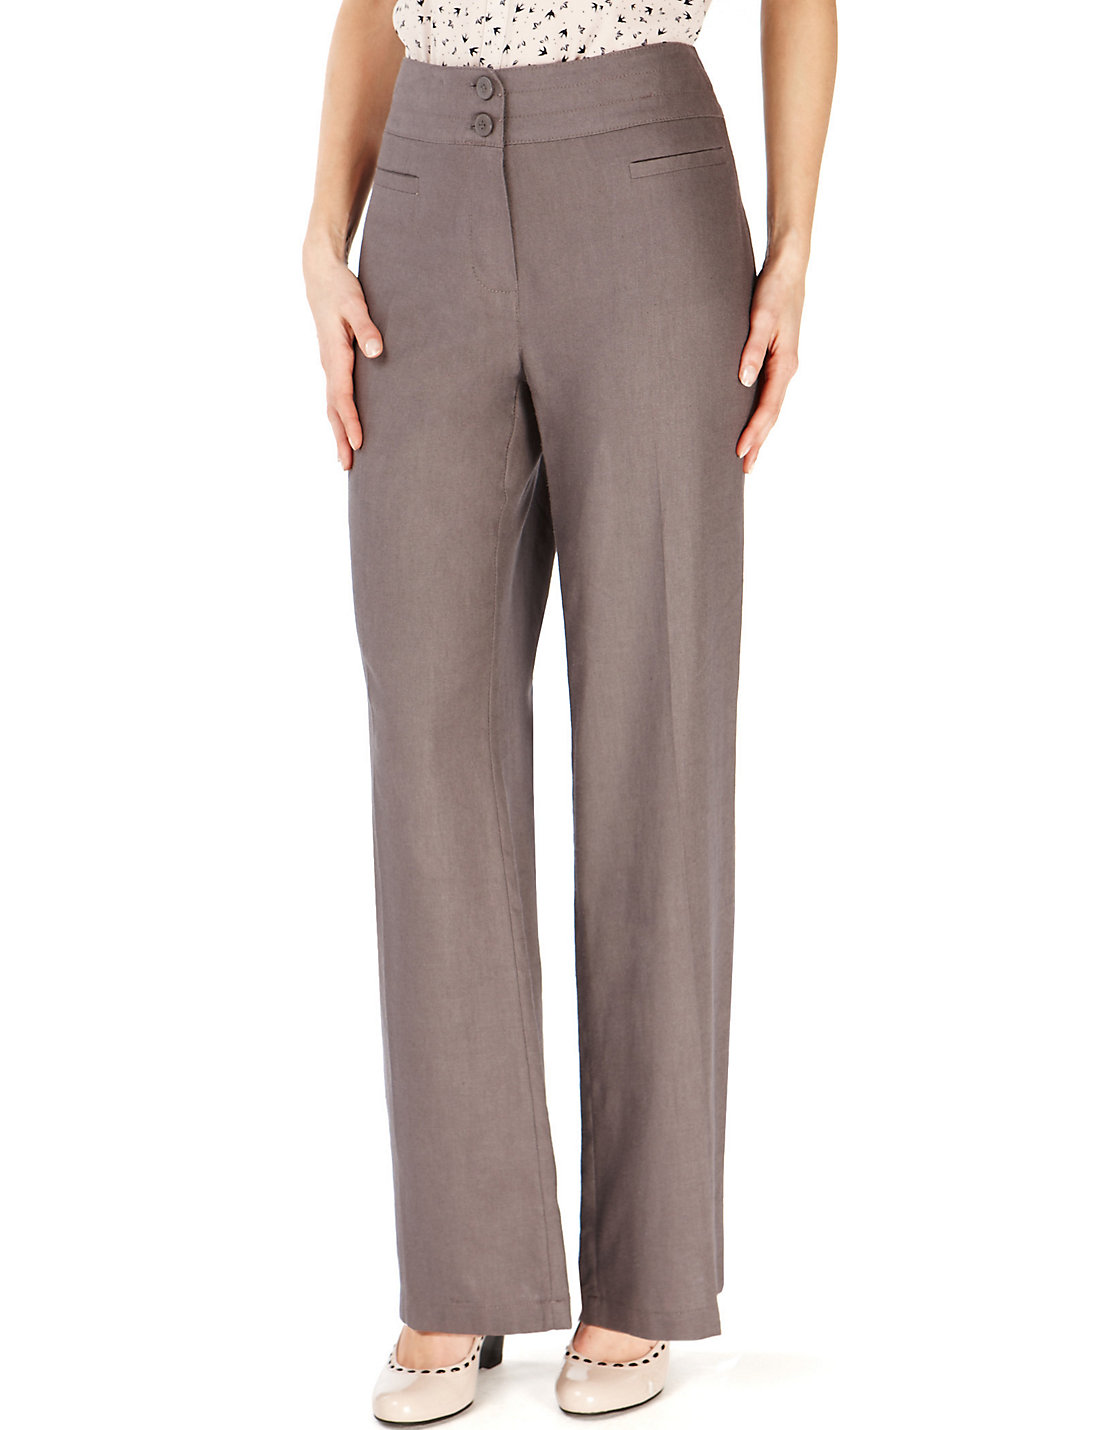 Marks and Spencer - - M&5 GREY Linen Blend Straight Leg Trousers - Size ...